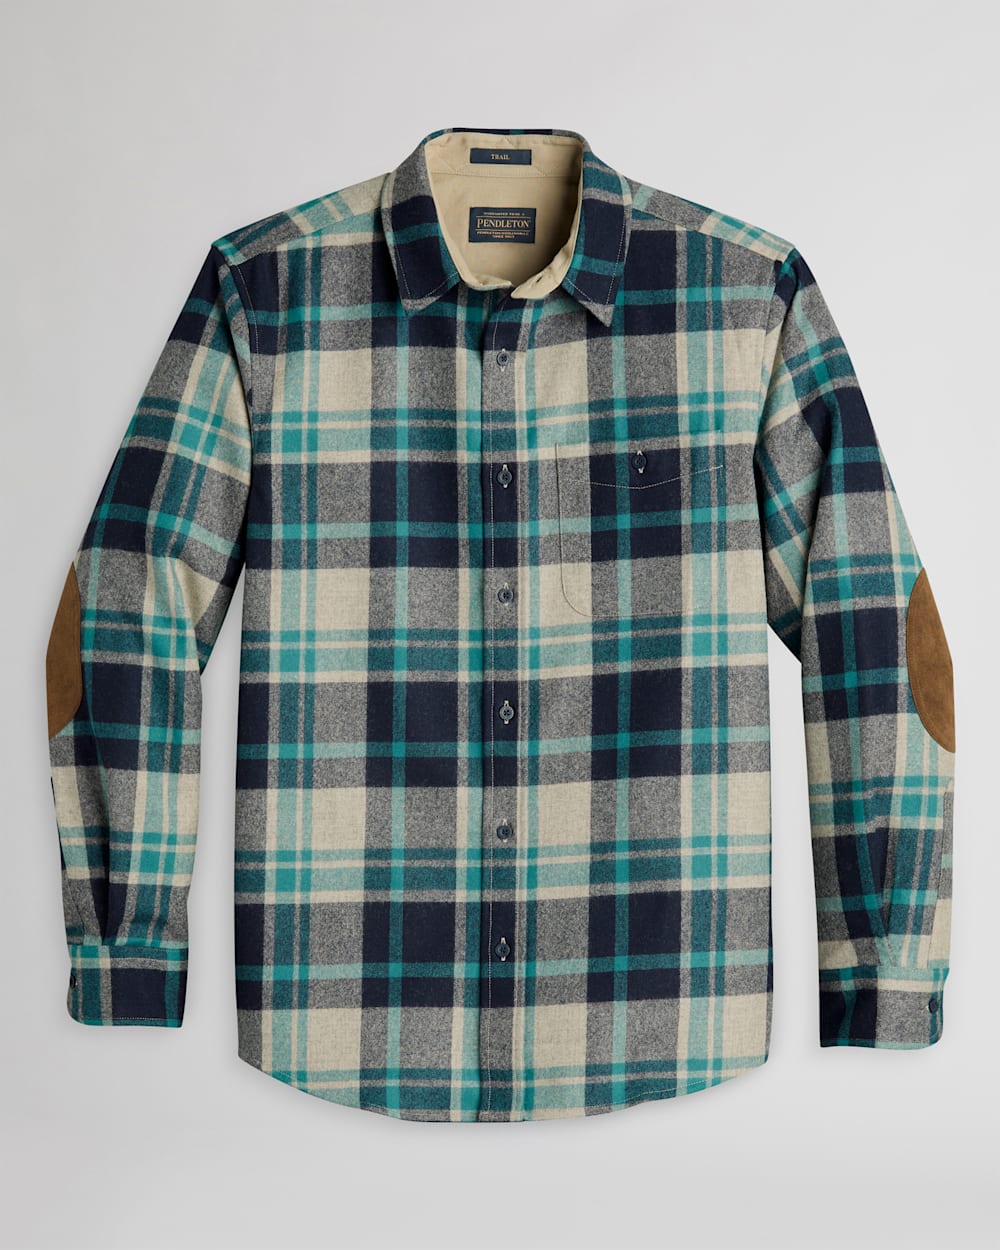 MEN'S PLAID TRAIL SHIRT IN TAN MIX/TEAL/NAVY PLAID image number 1